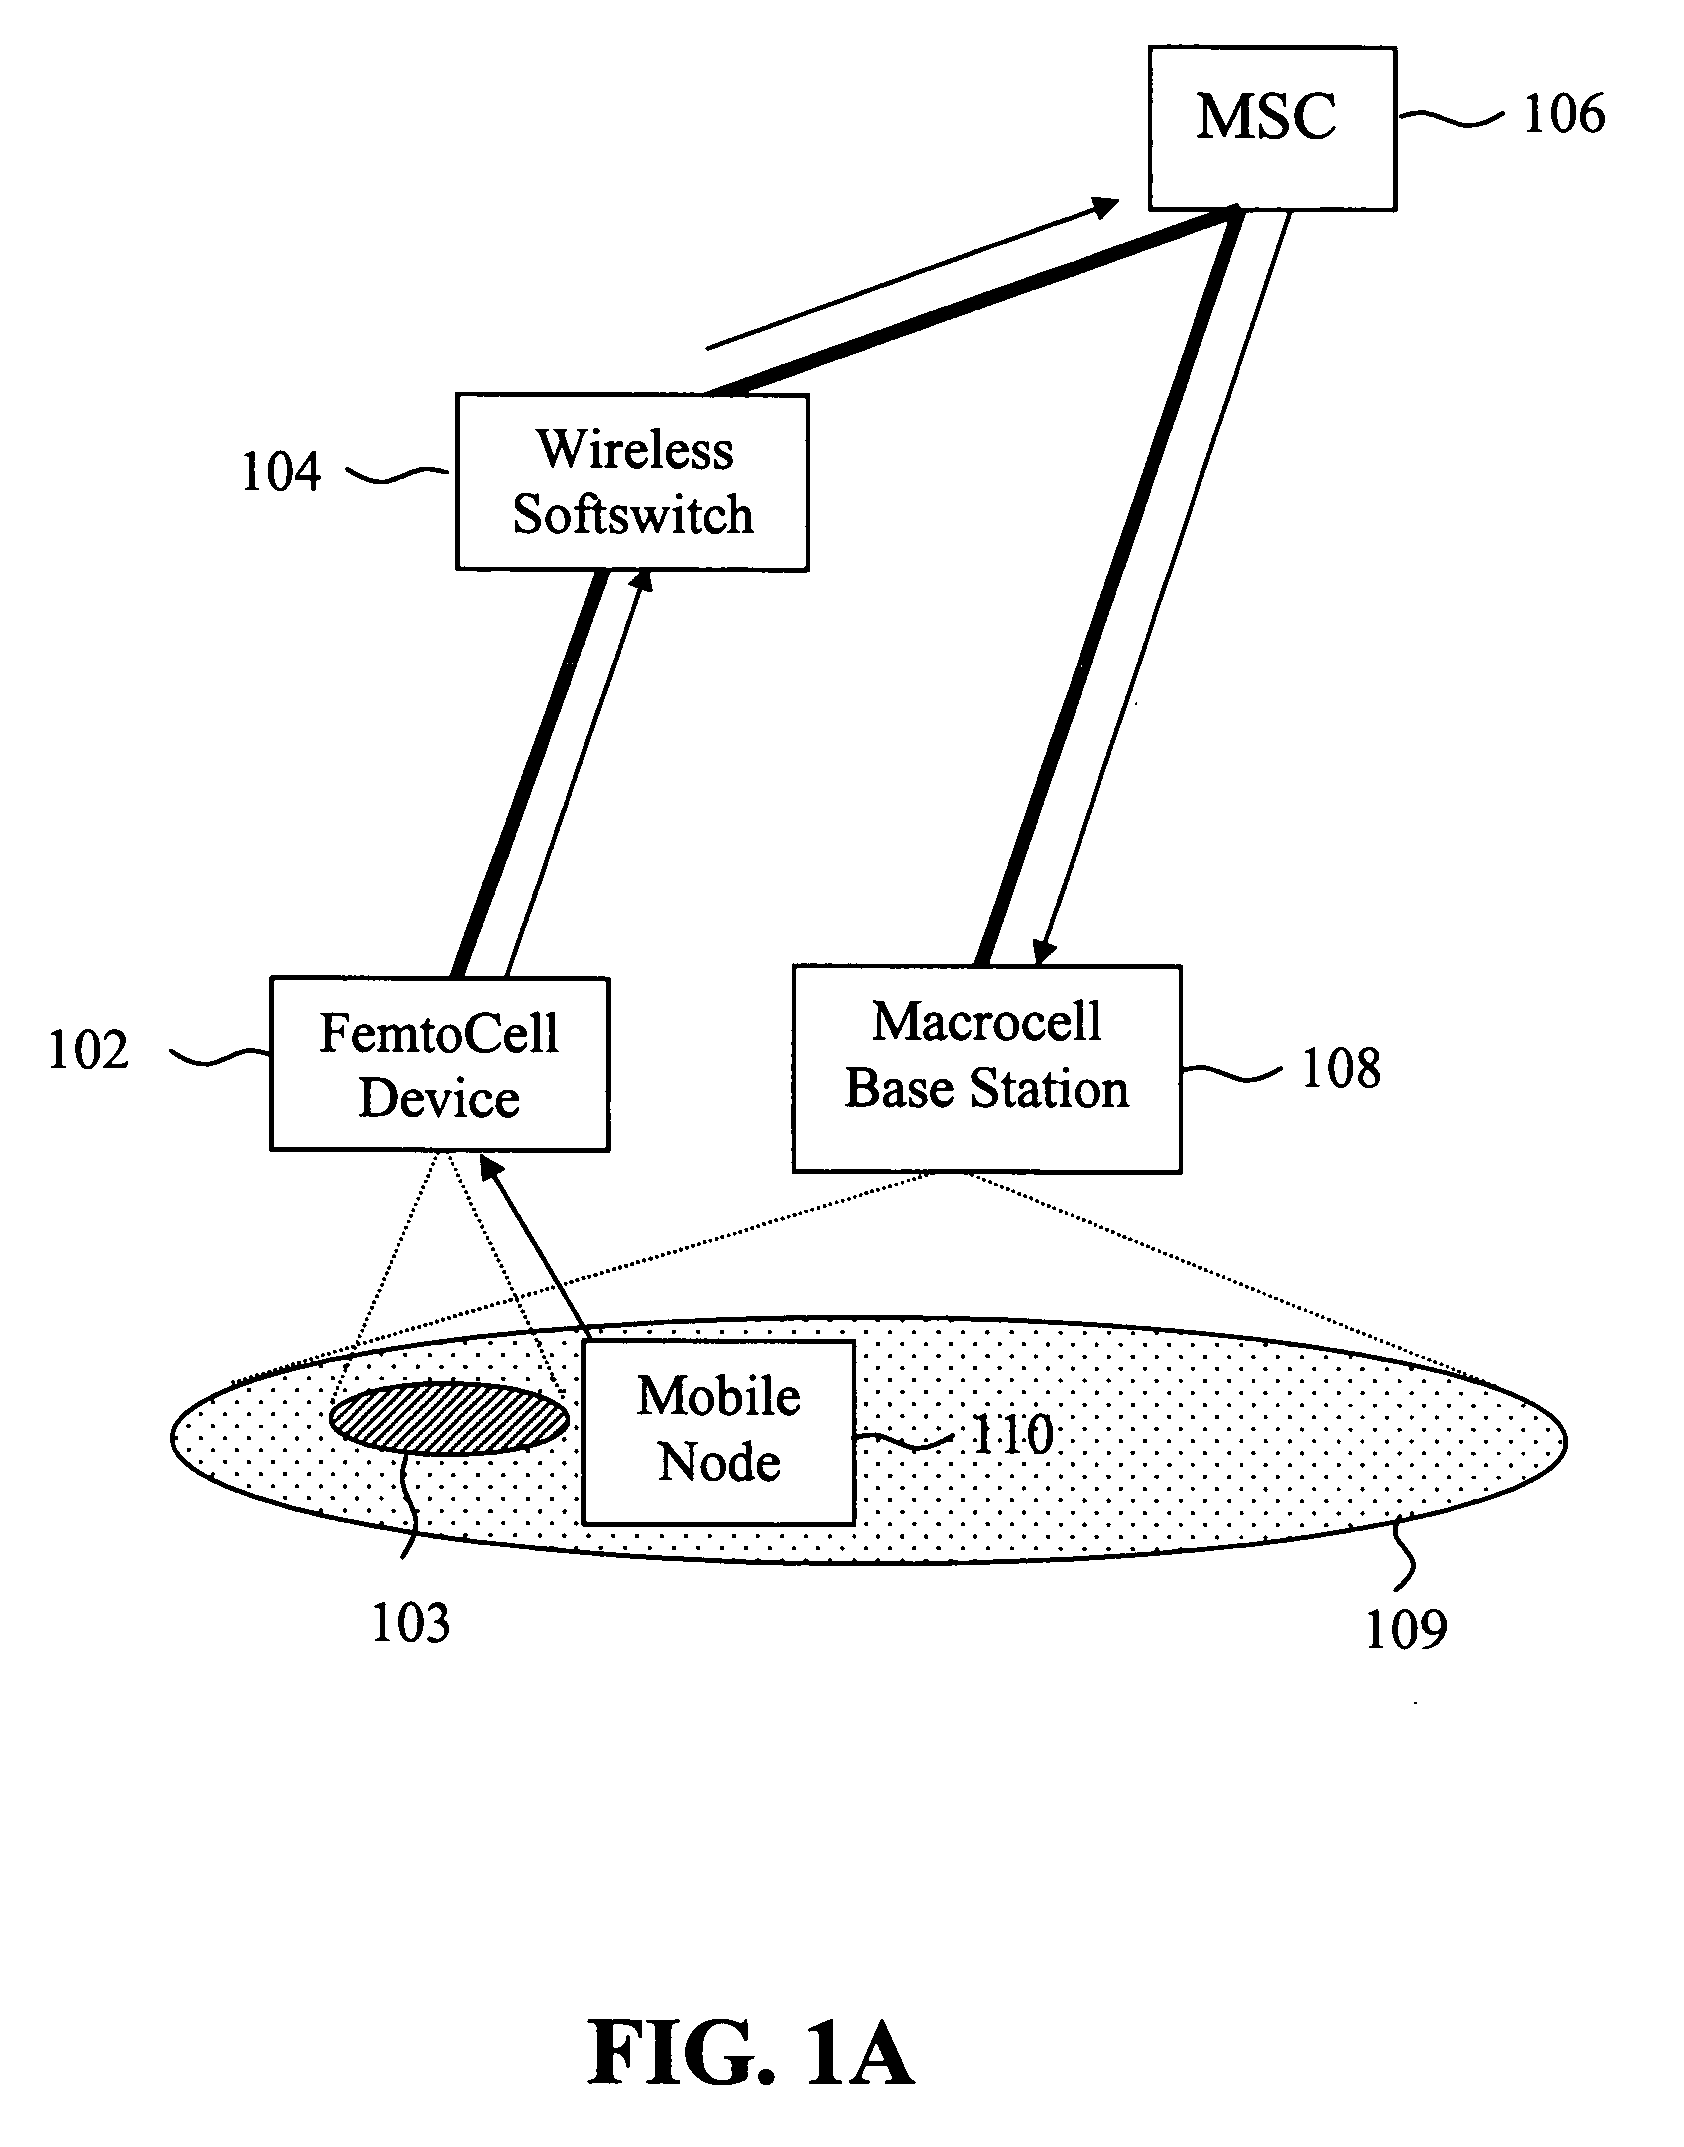 Location based femtocell device configuration and handoff